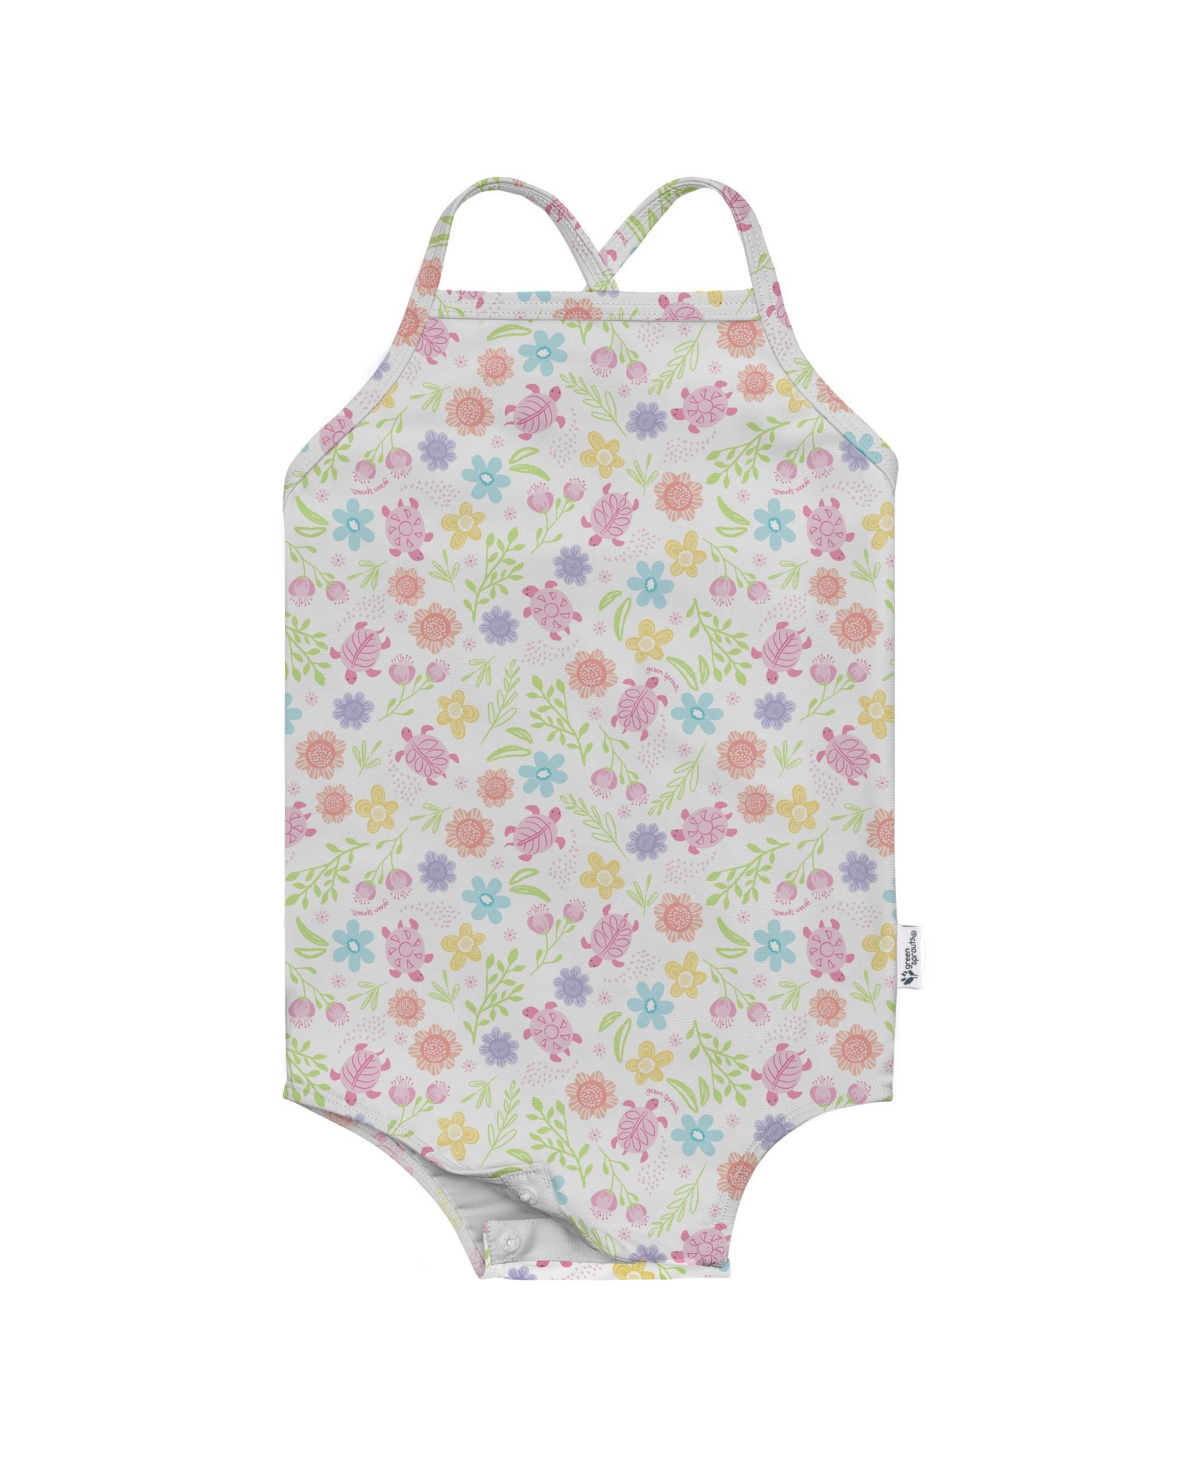 GREEN SPROUTS TODDLER GIRLS LIGHTWEIGHT EASY CHANGE SWIMSUIT